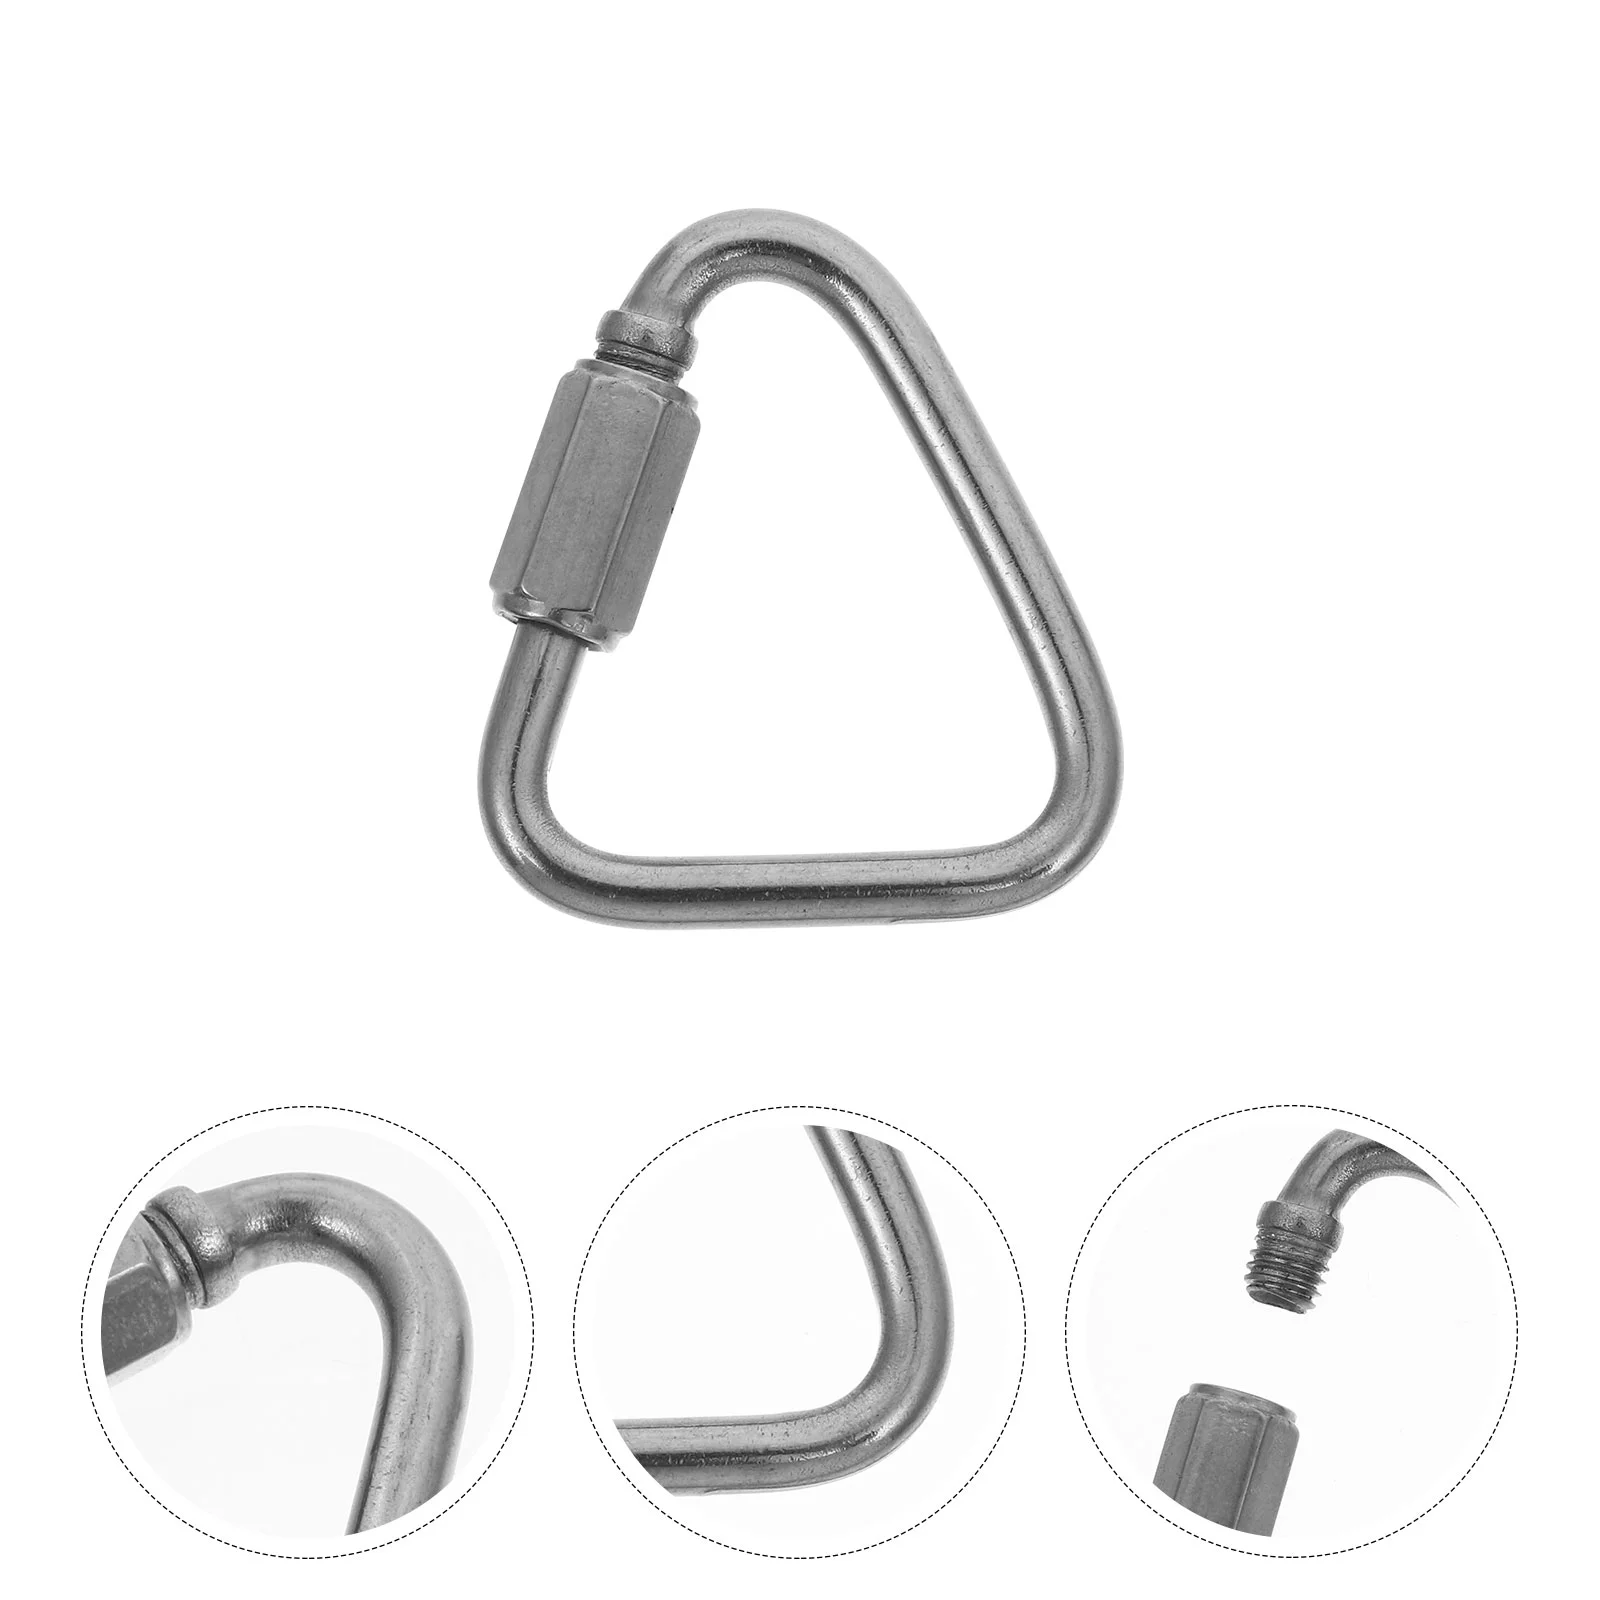 4 Pcs Connector Connecting Ring Triangular Quick Link Stainless Steel Rope Connectors цена и фото